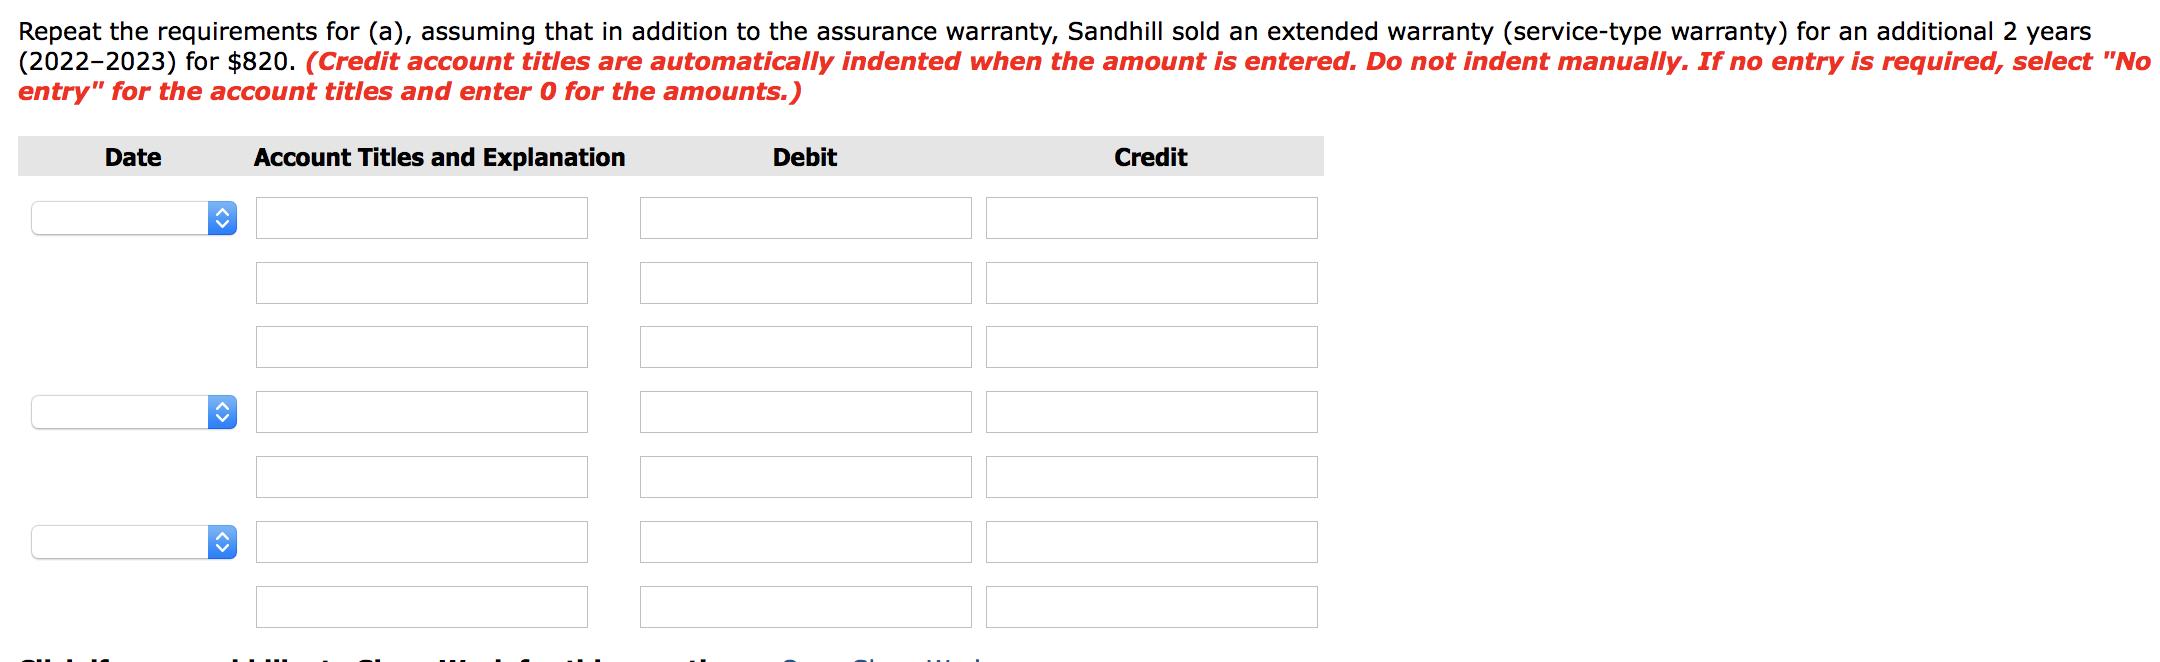 Repeat the requirements for (a), assuming that in addition to the assurance warranty, Sandhill sold an extended warranty (ser